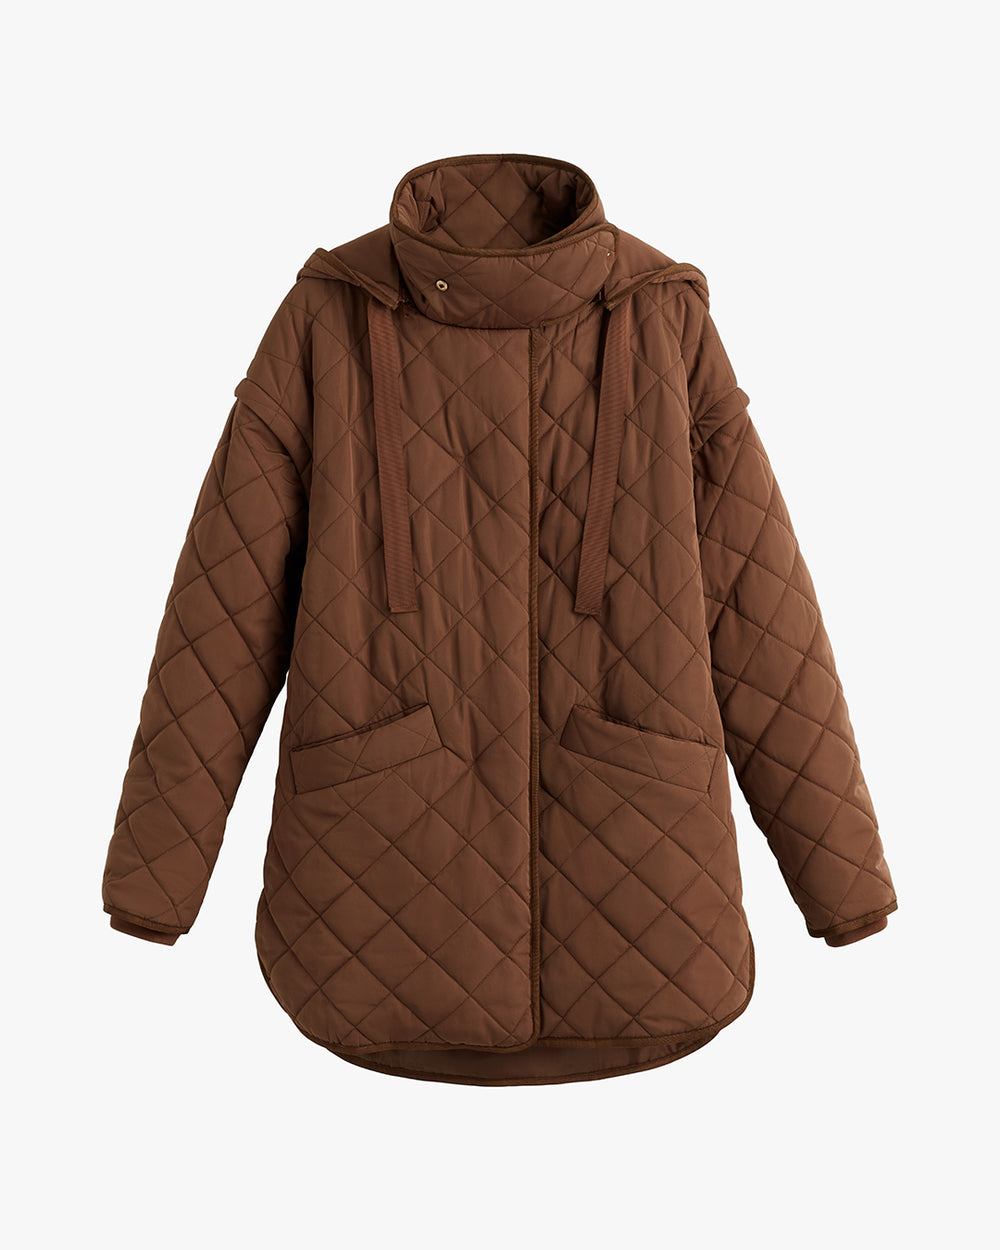 Winter jacket with hood and front pockets.